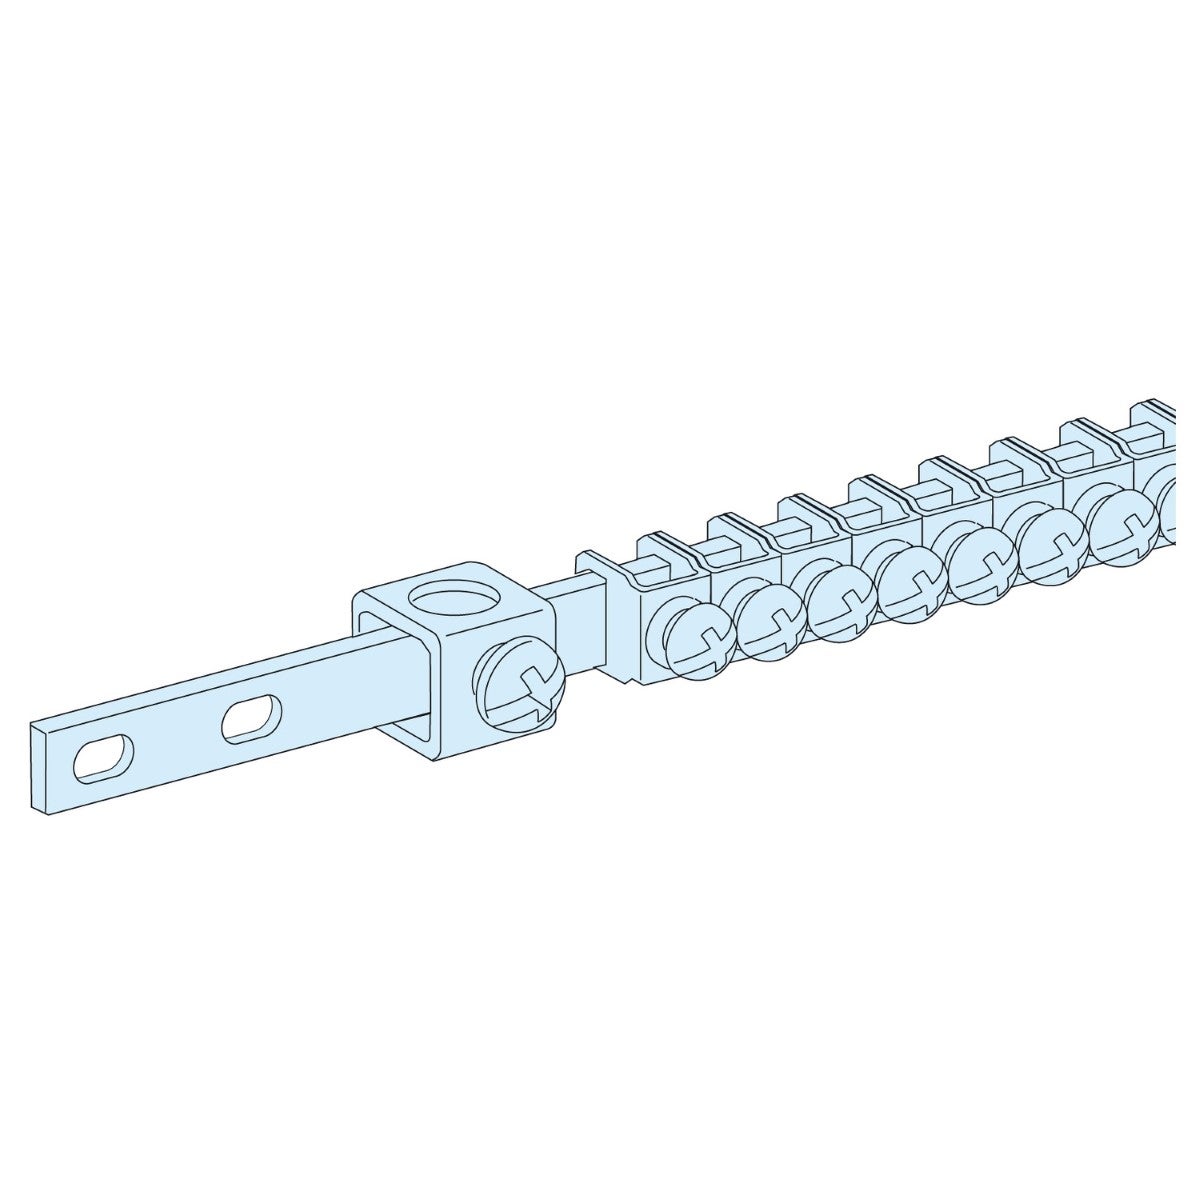 EARTH BAR 35�/40 CLAMPS L450 LINERGY TB